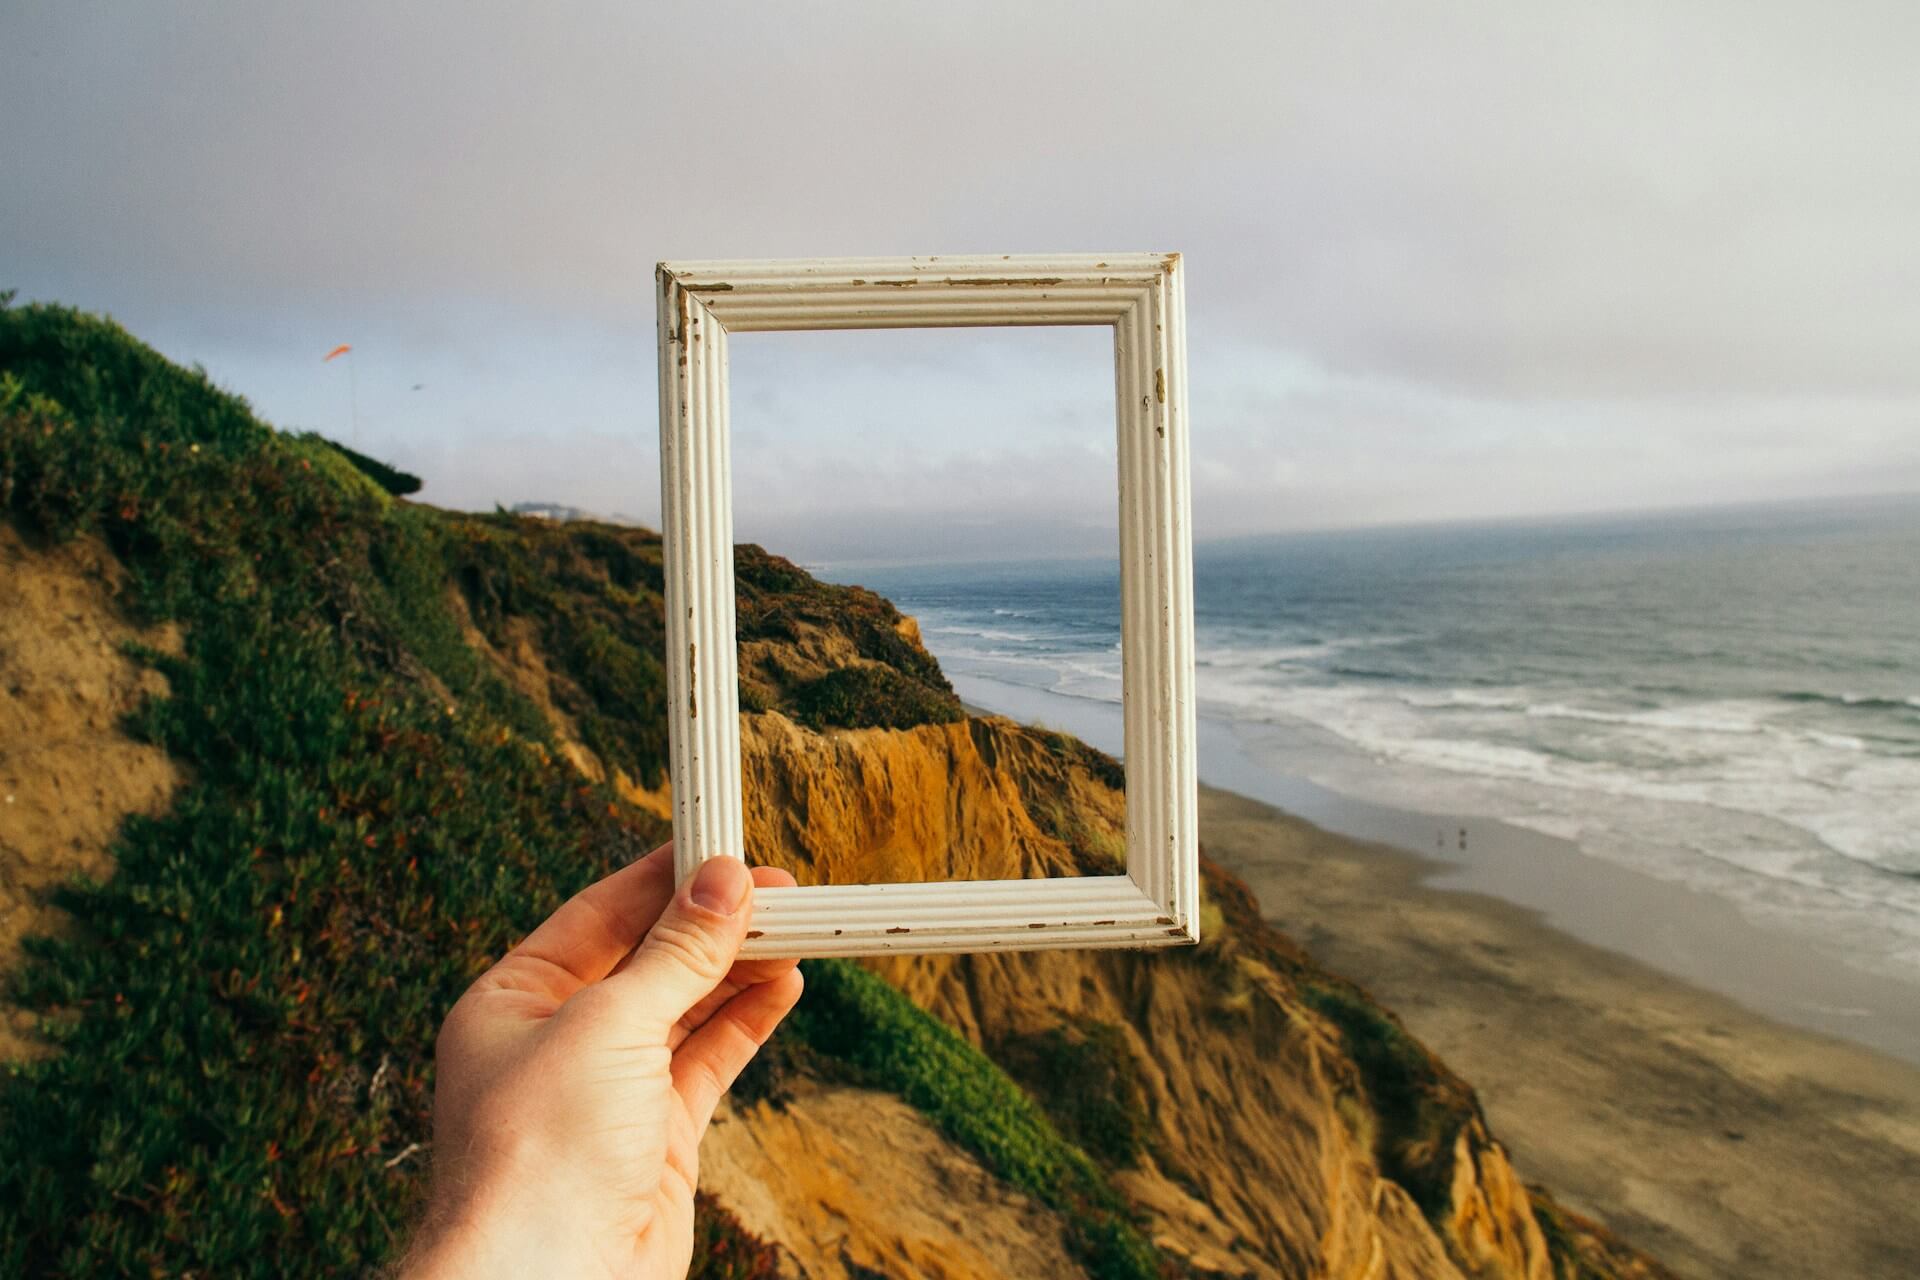 A person holding an empty picture frame overlooking a beach view